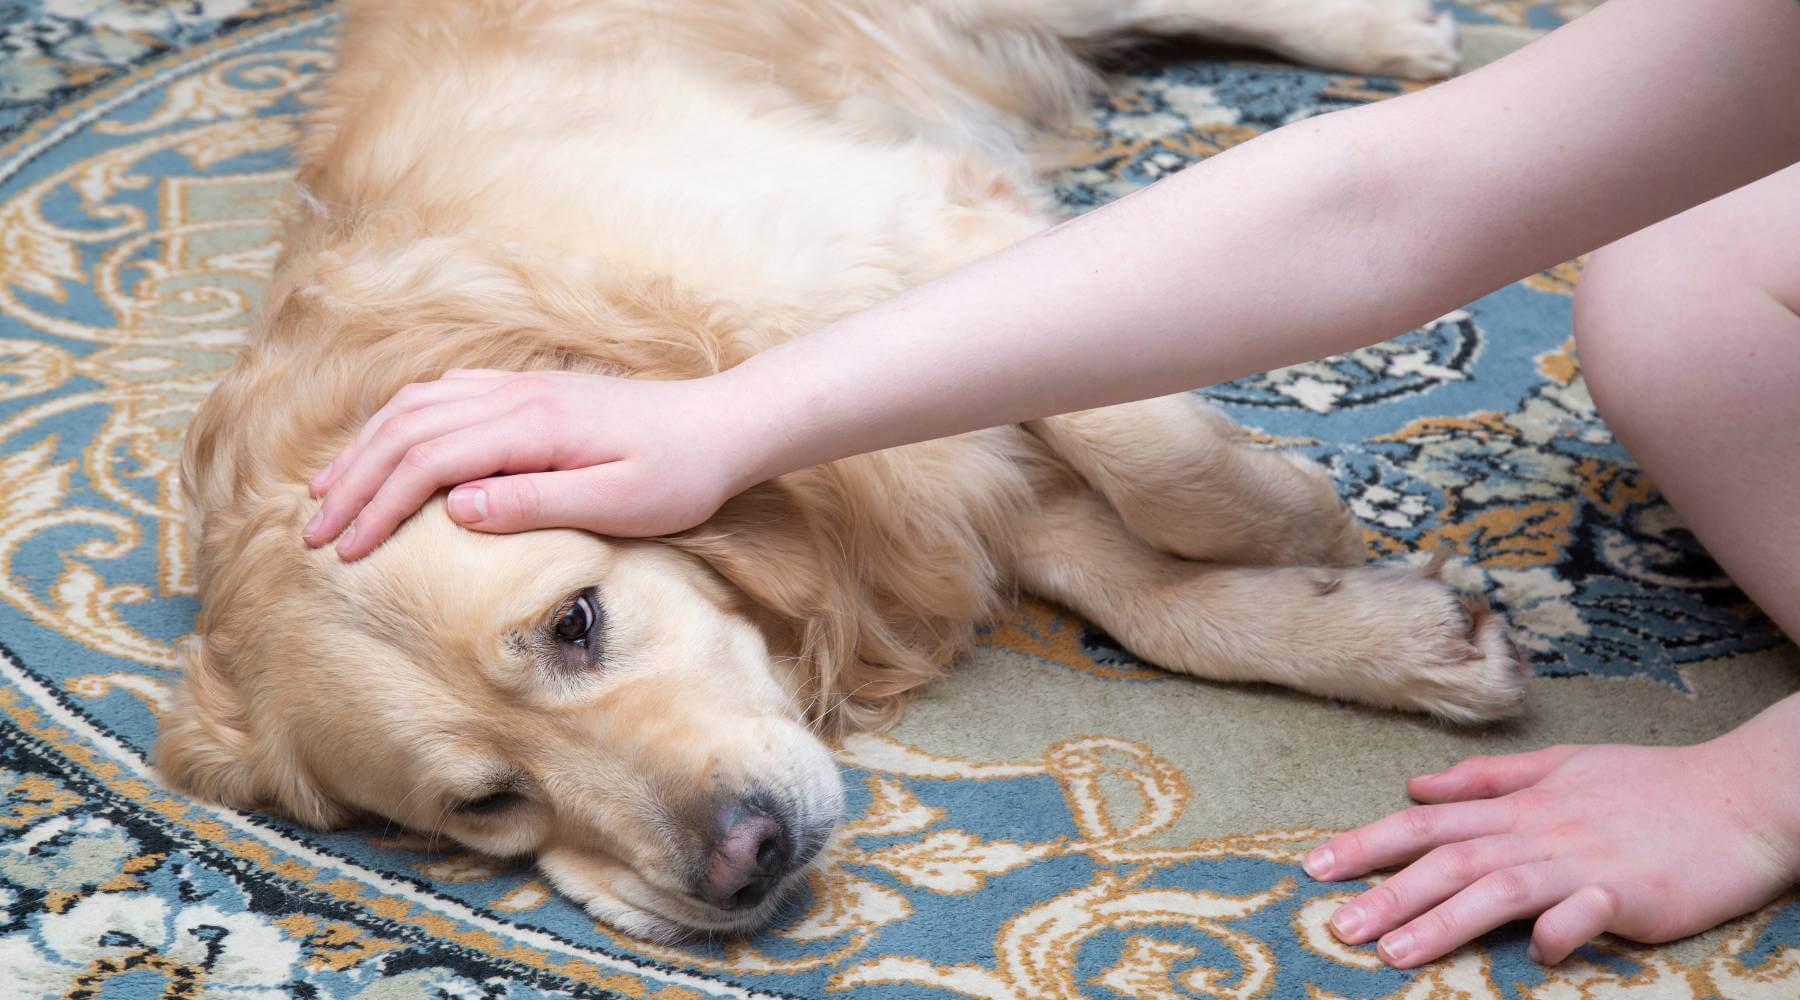 As dog owners, we all want to keep our furry friends healthy and happy. But when our beloved pets suffer from an upset stomach or diarrhoea, it can be distressing.